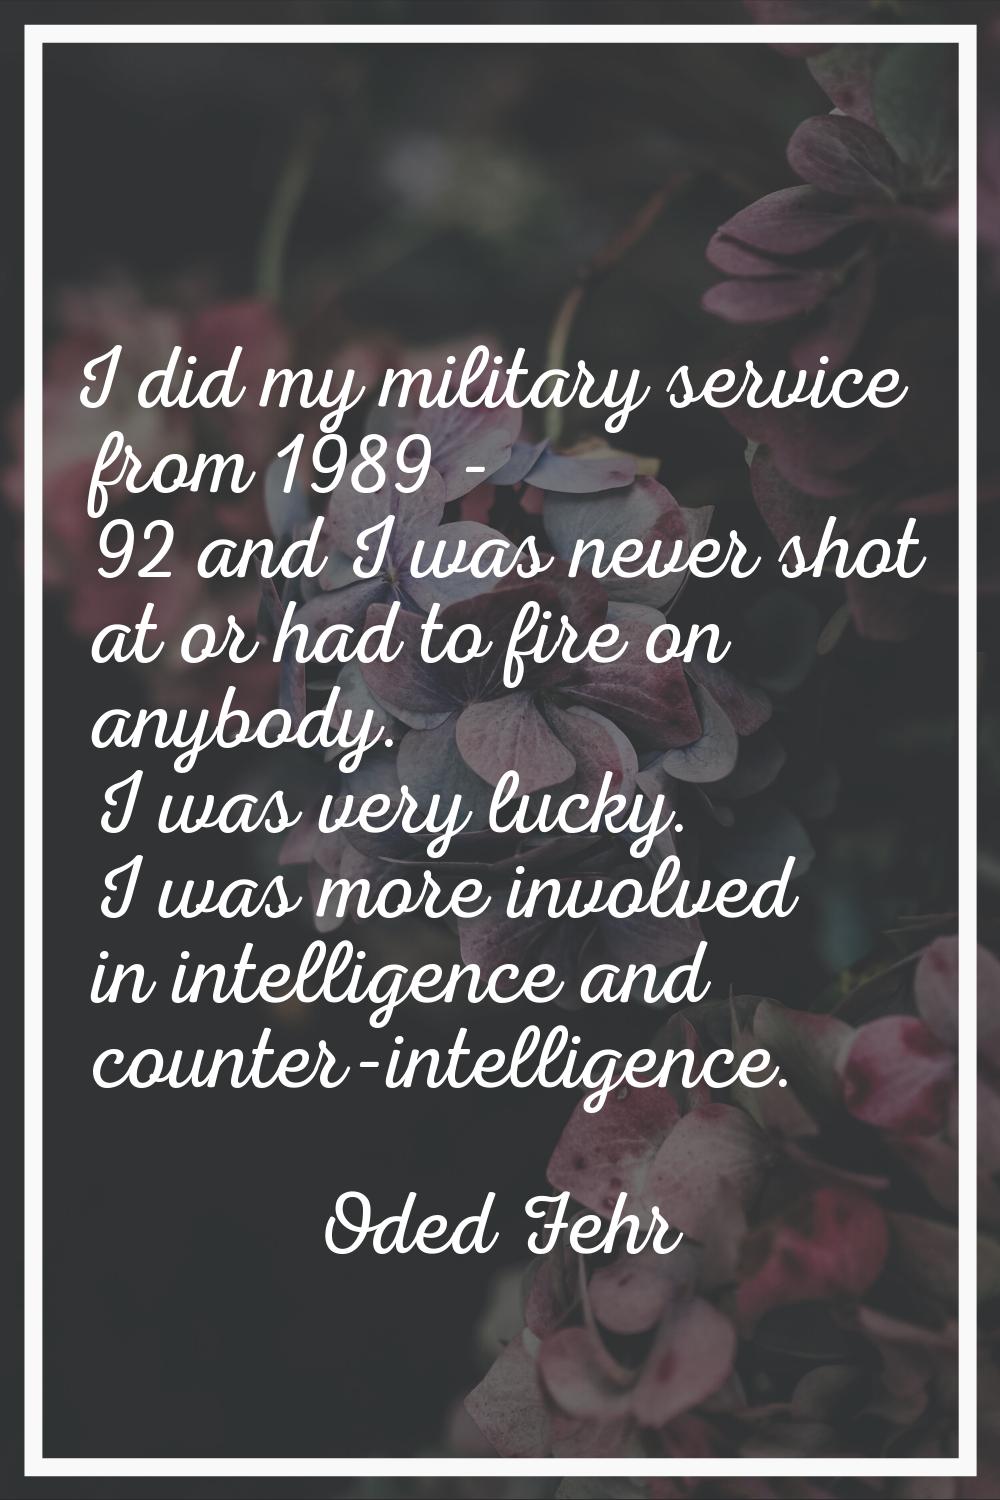 I did my military service from 1989 - 92 and I was never shot at or had to fire on anybody. I was v